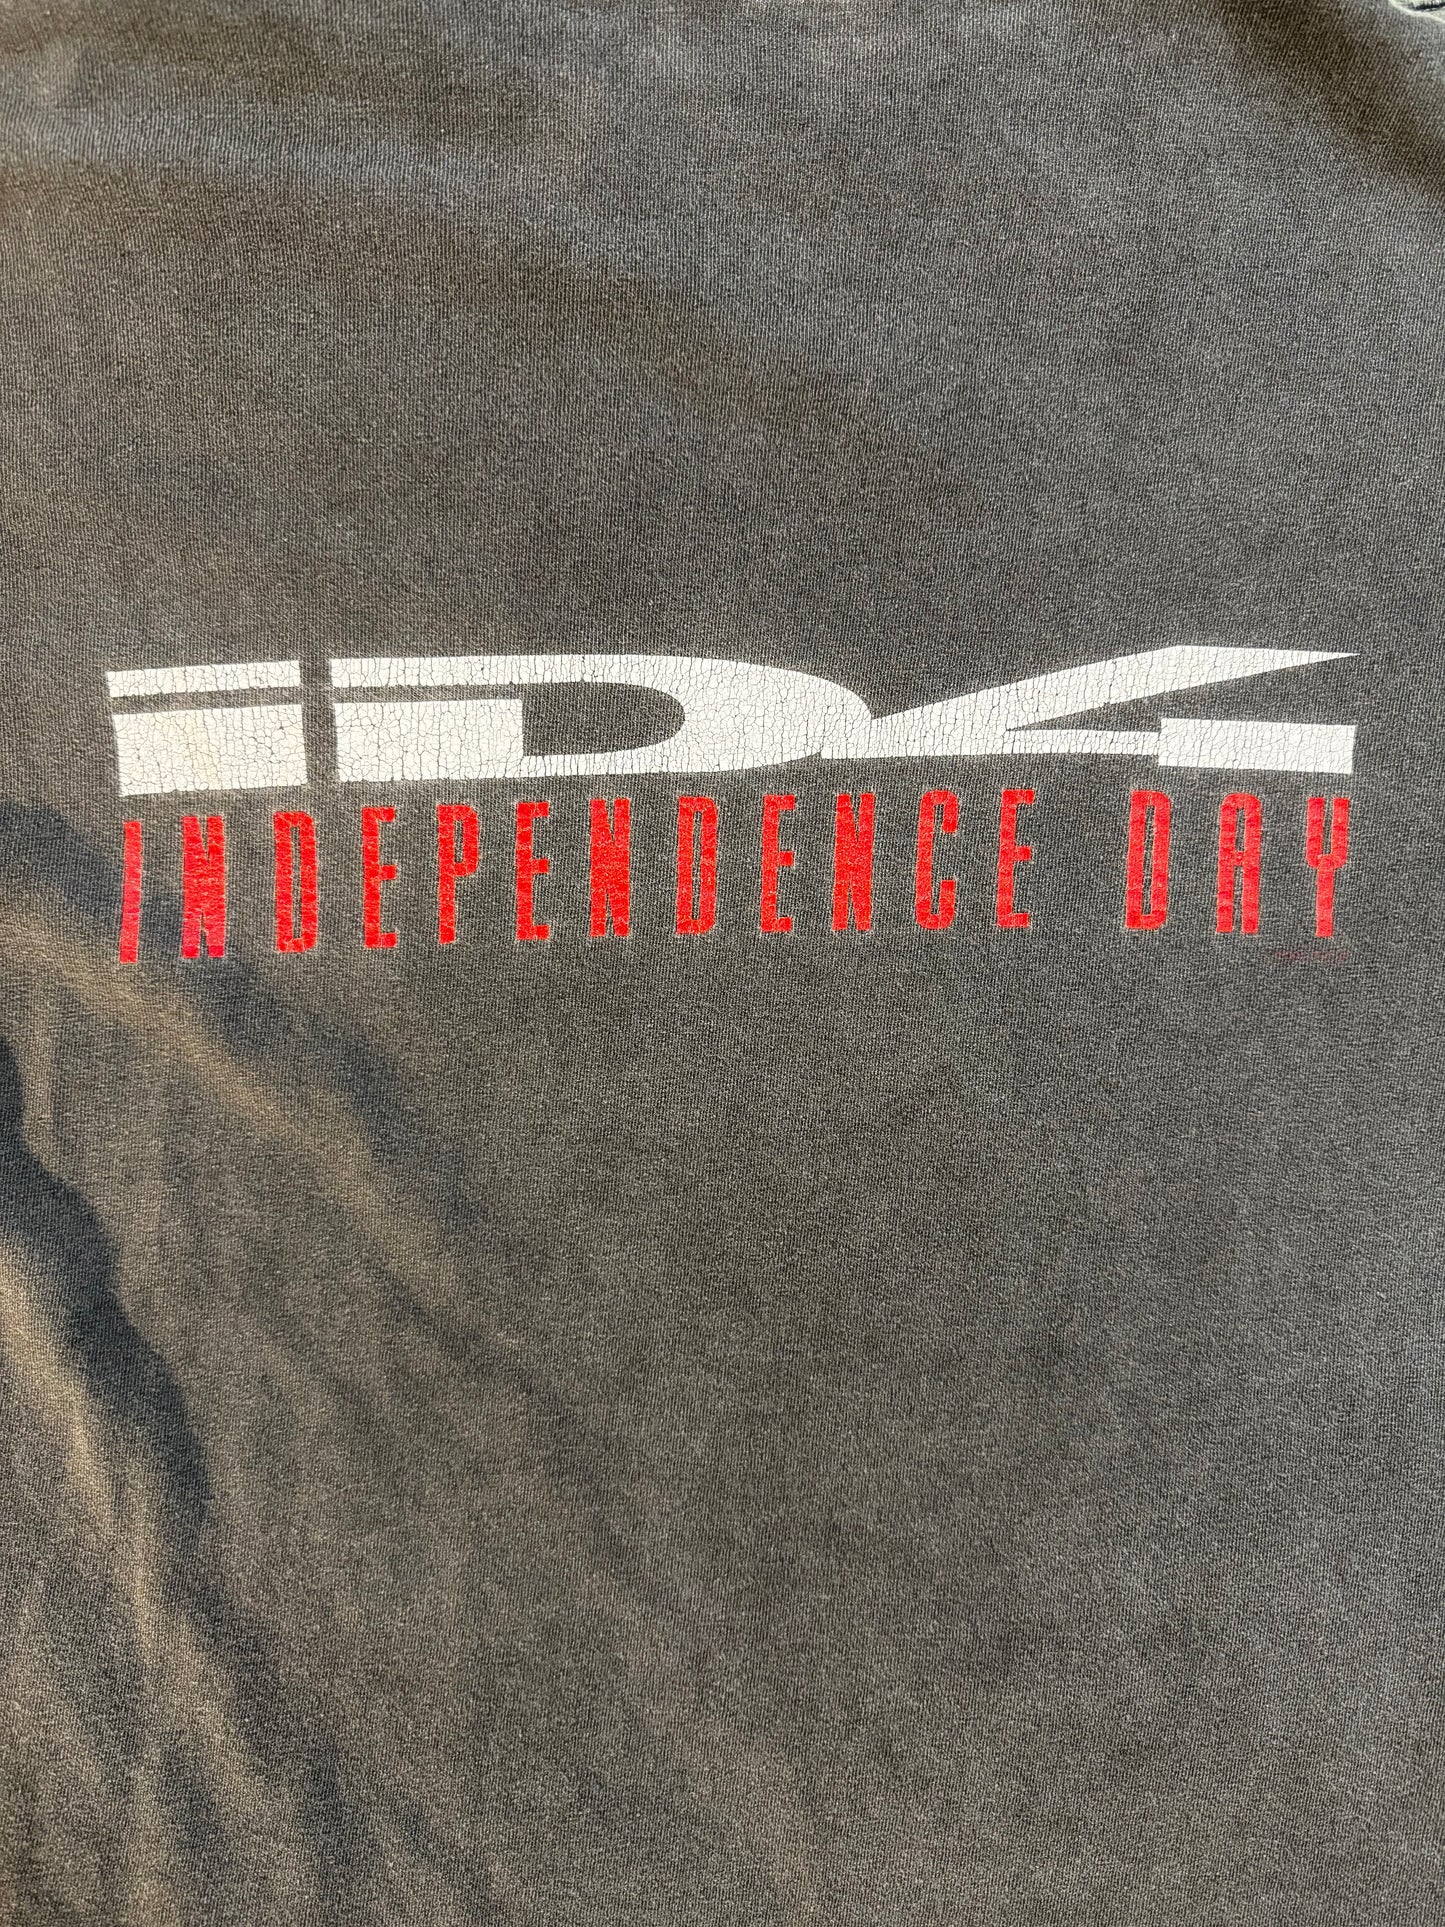 1996 Independence Day Movie T Shirt